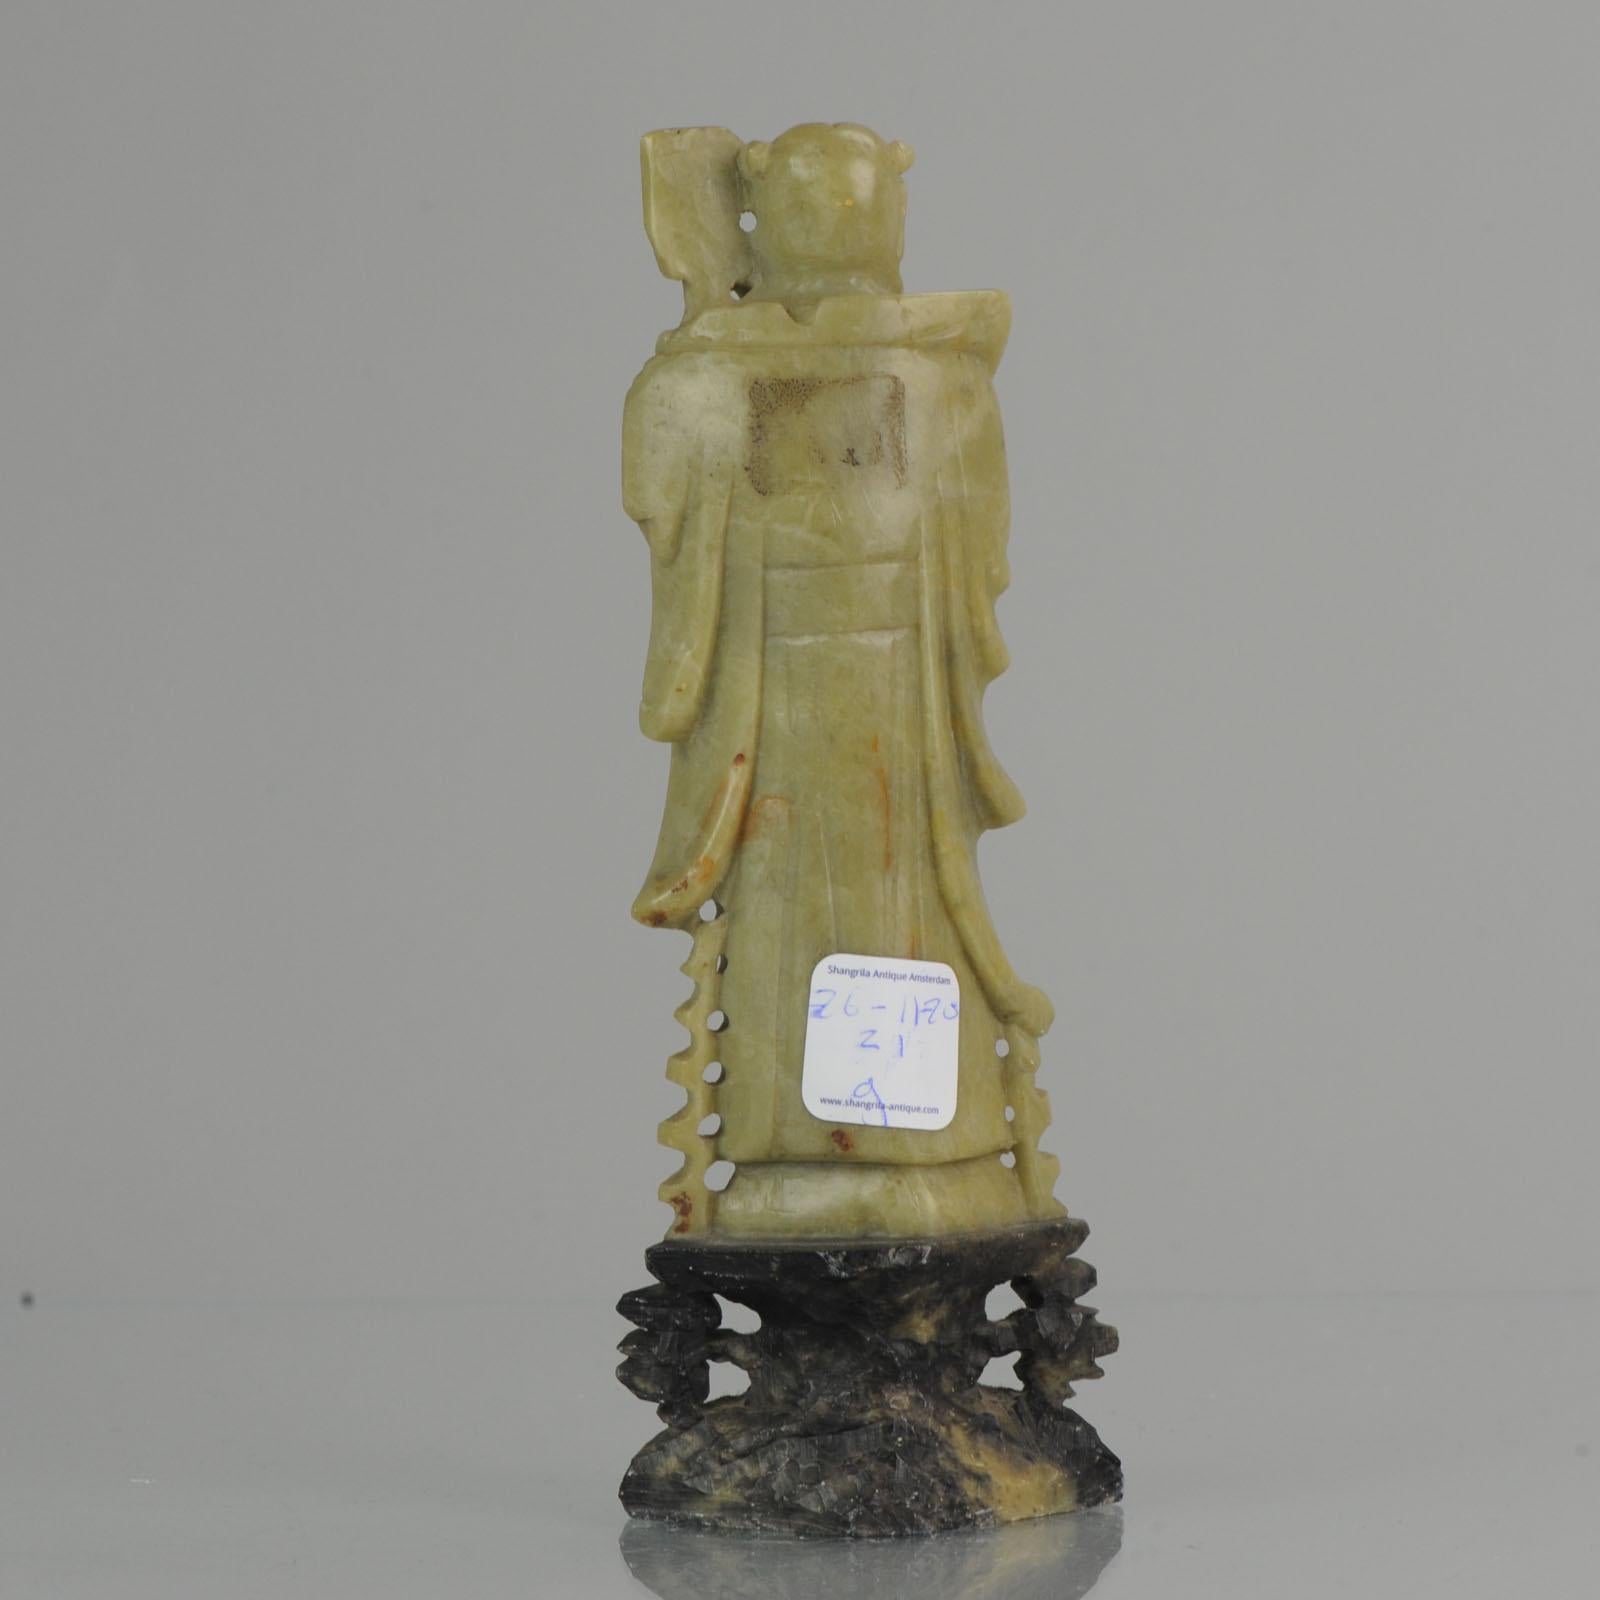 Lovely Qing Dynasty Chinese Soapstone Statue Nicely Carved Wise Man In Good Condition For Sale In Amsterdam, Noord Holland